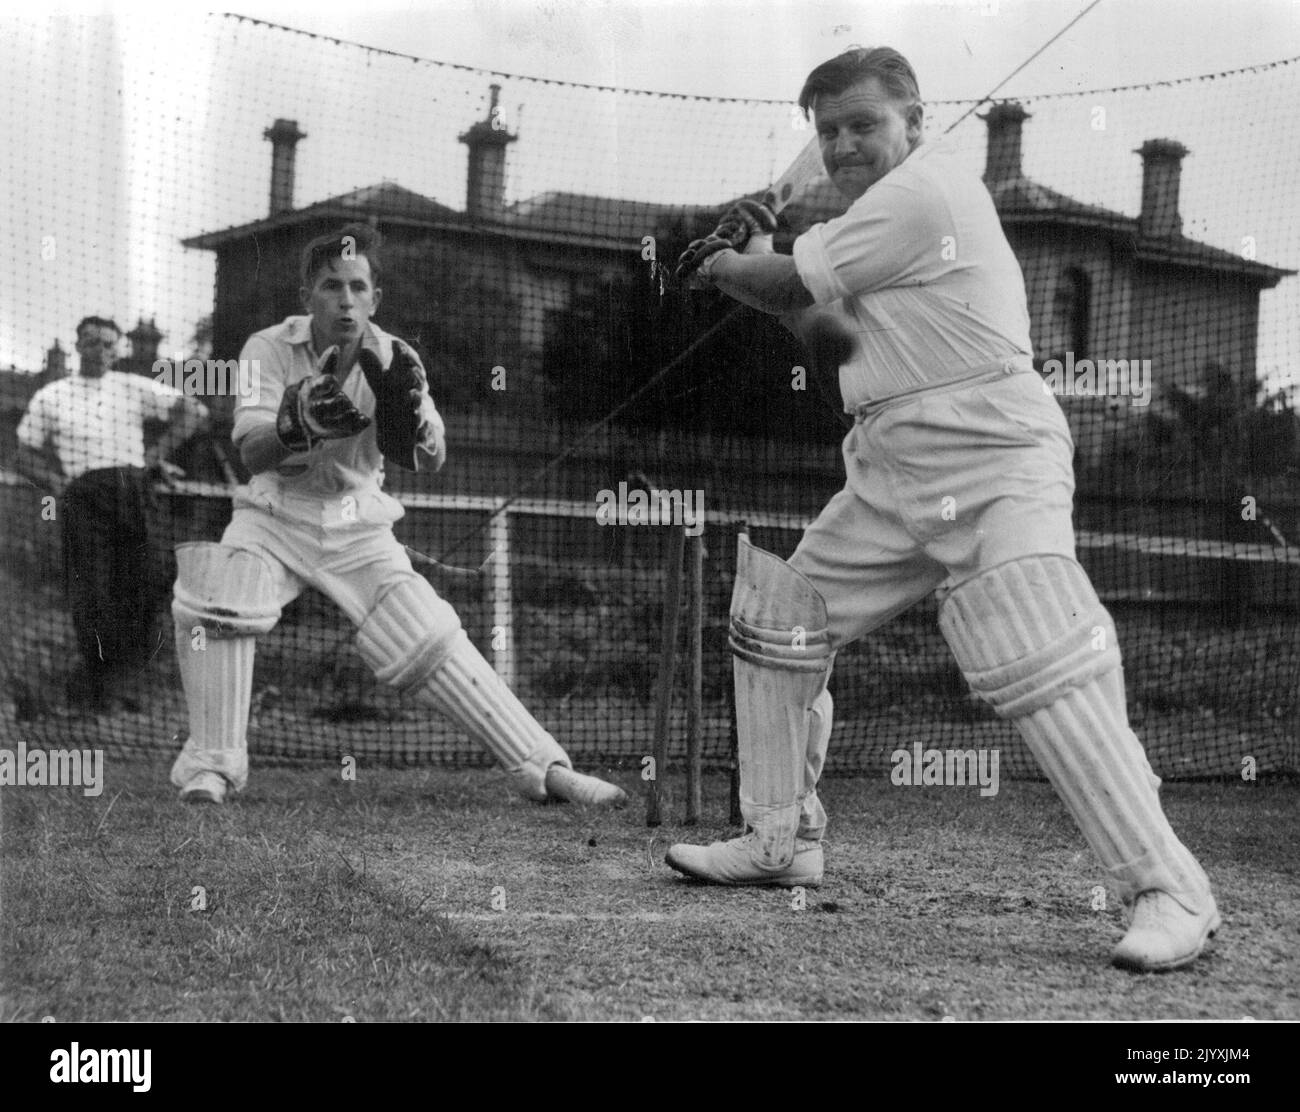 Hefty Keith Stackpoole puts power into a shot during practice. He has been selected in Victoria's Sheffield Shield team, announced during the week-end. November 14, 1949. Stock Photo